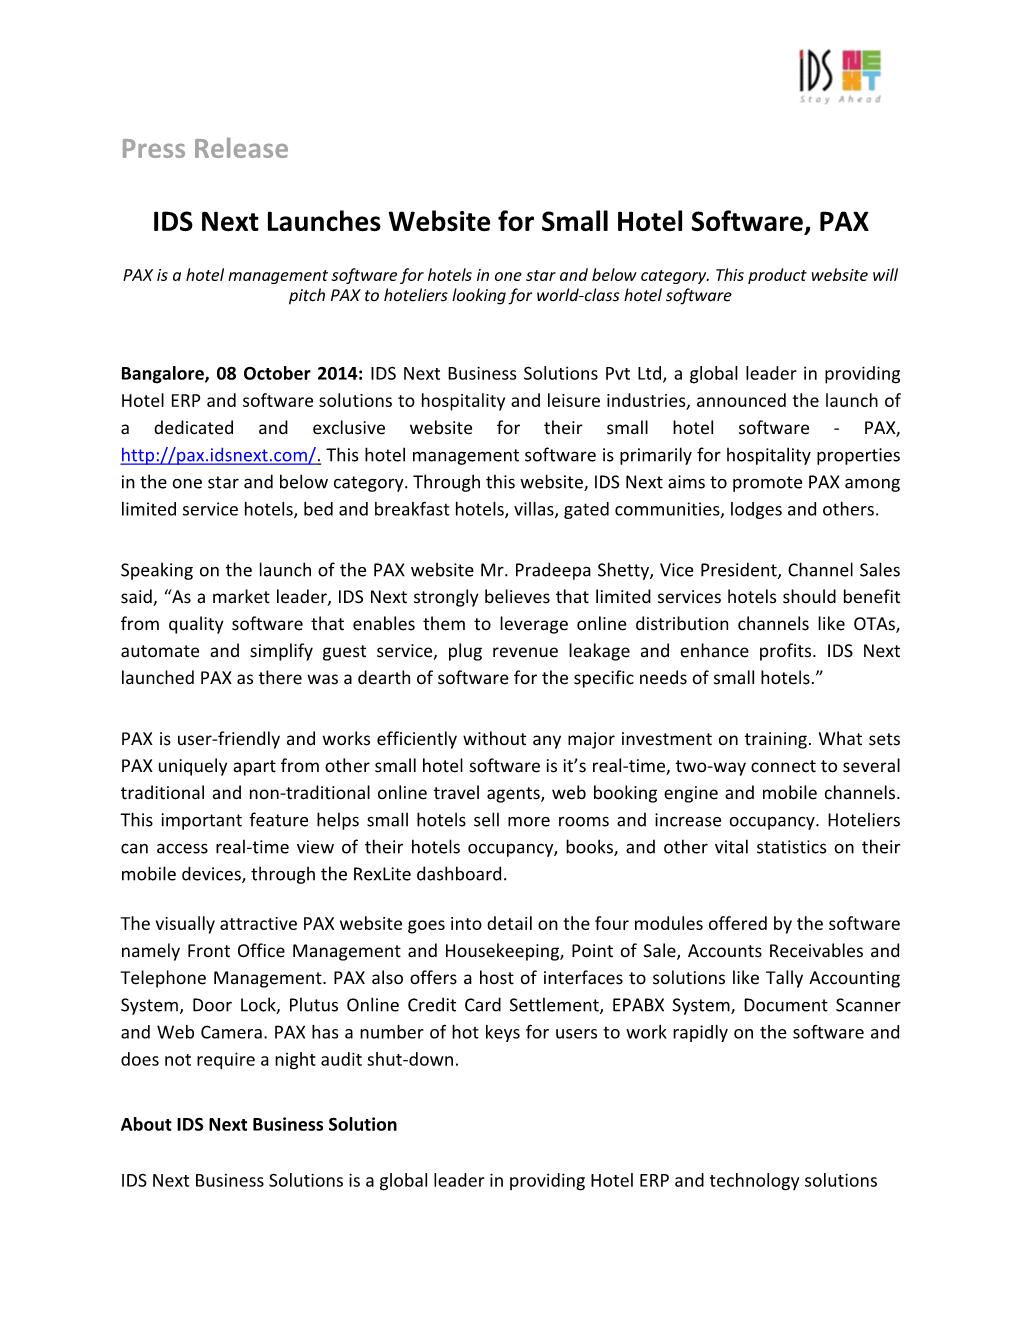 IDS Next Launches Website for Small Hotel Software, PAX